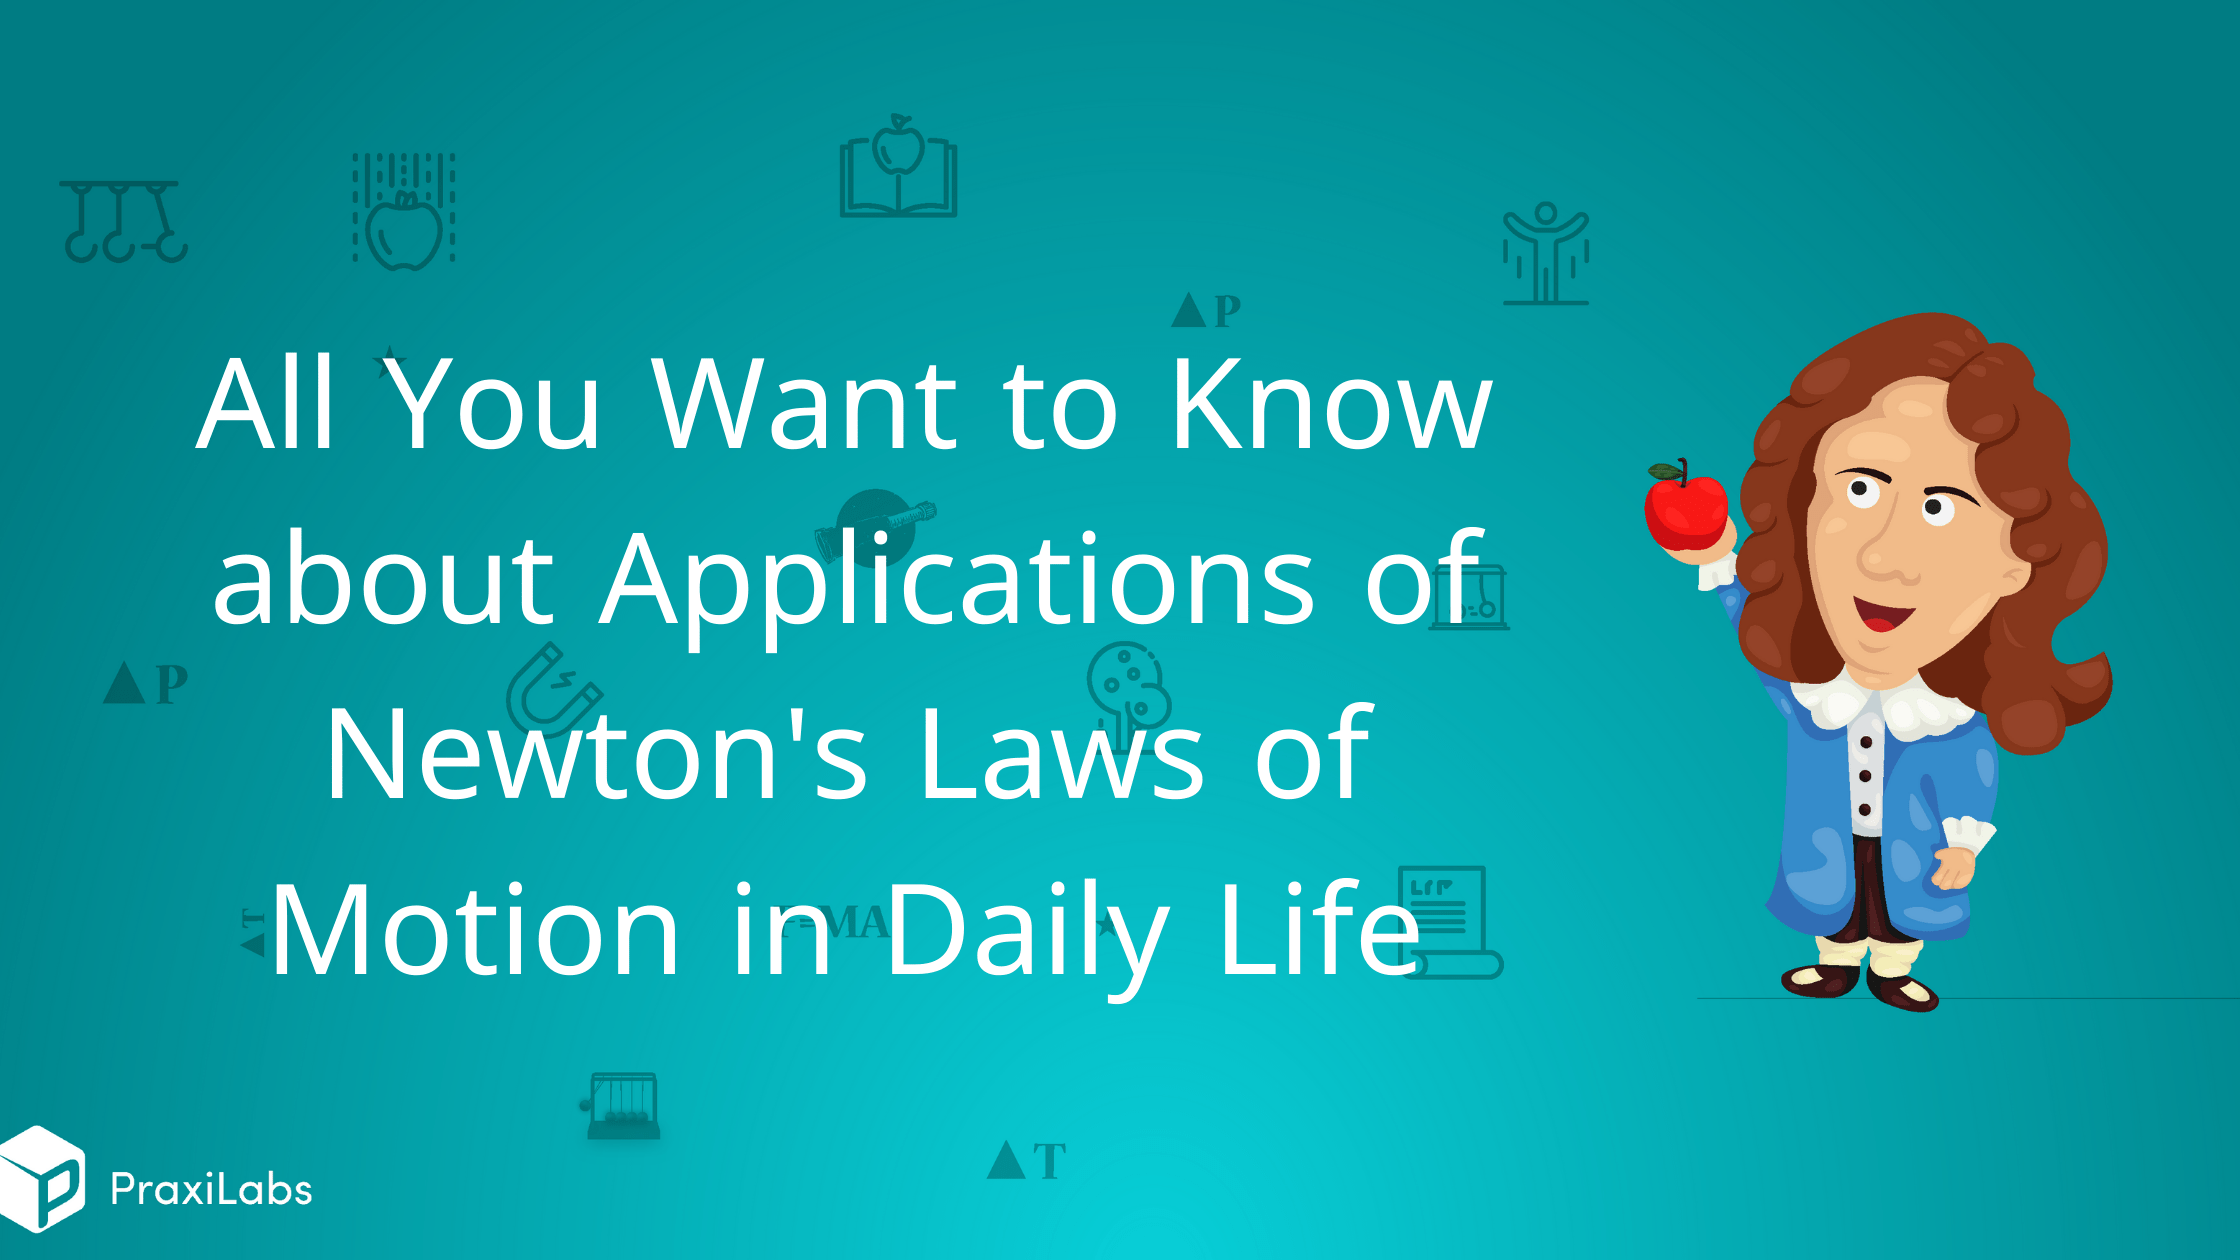 Applications of Newton's Laws of Motion in Daily Life - PraxiLabs